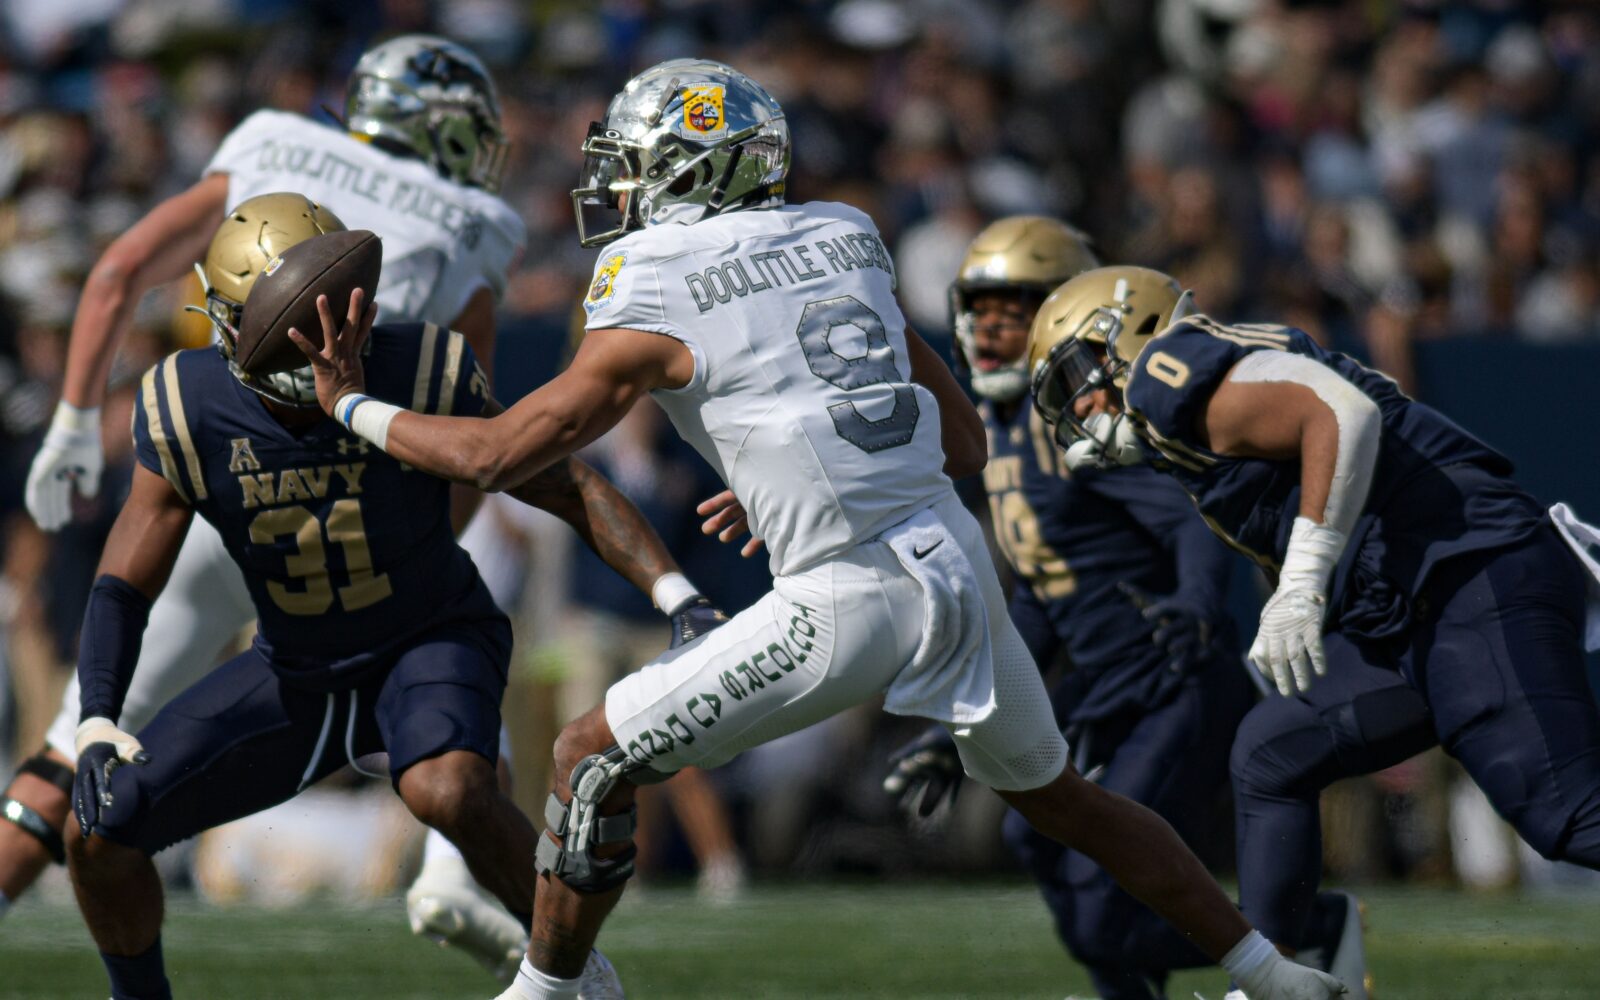 BREAKING: Air Force Win Snowy Game At CSU To Stay Undefeated, Move To 8-0 -  Sports Illustrated G5 Football Daily News, Analysis and More